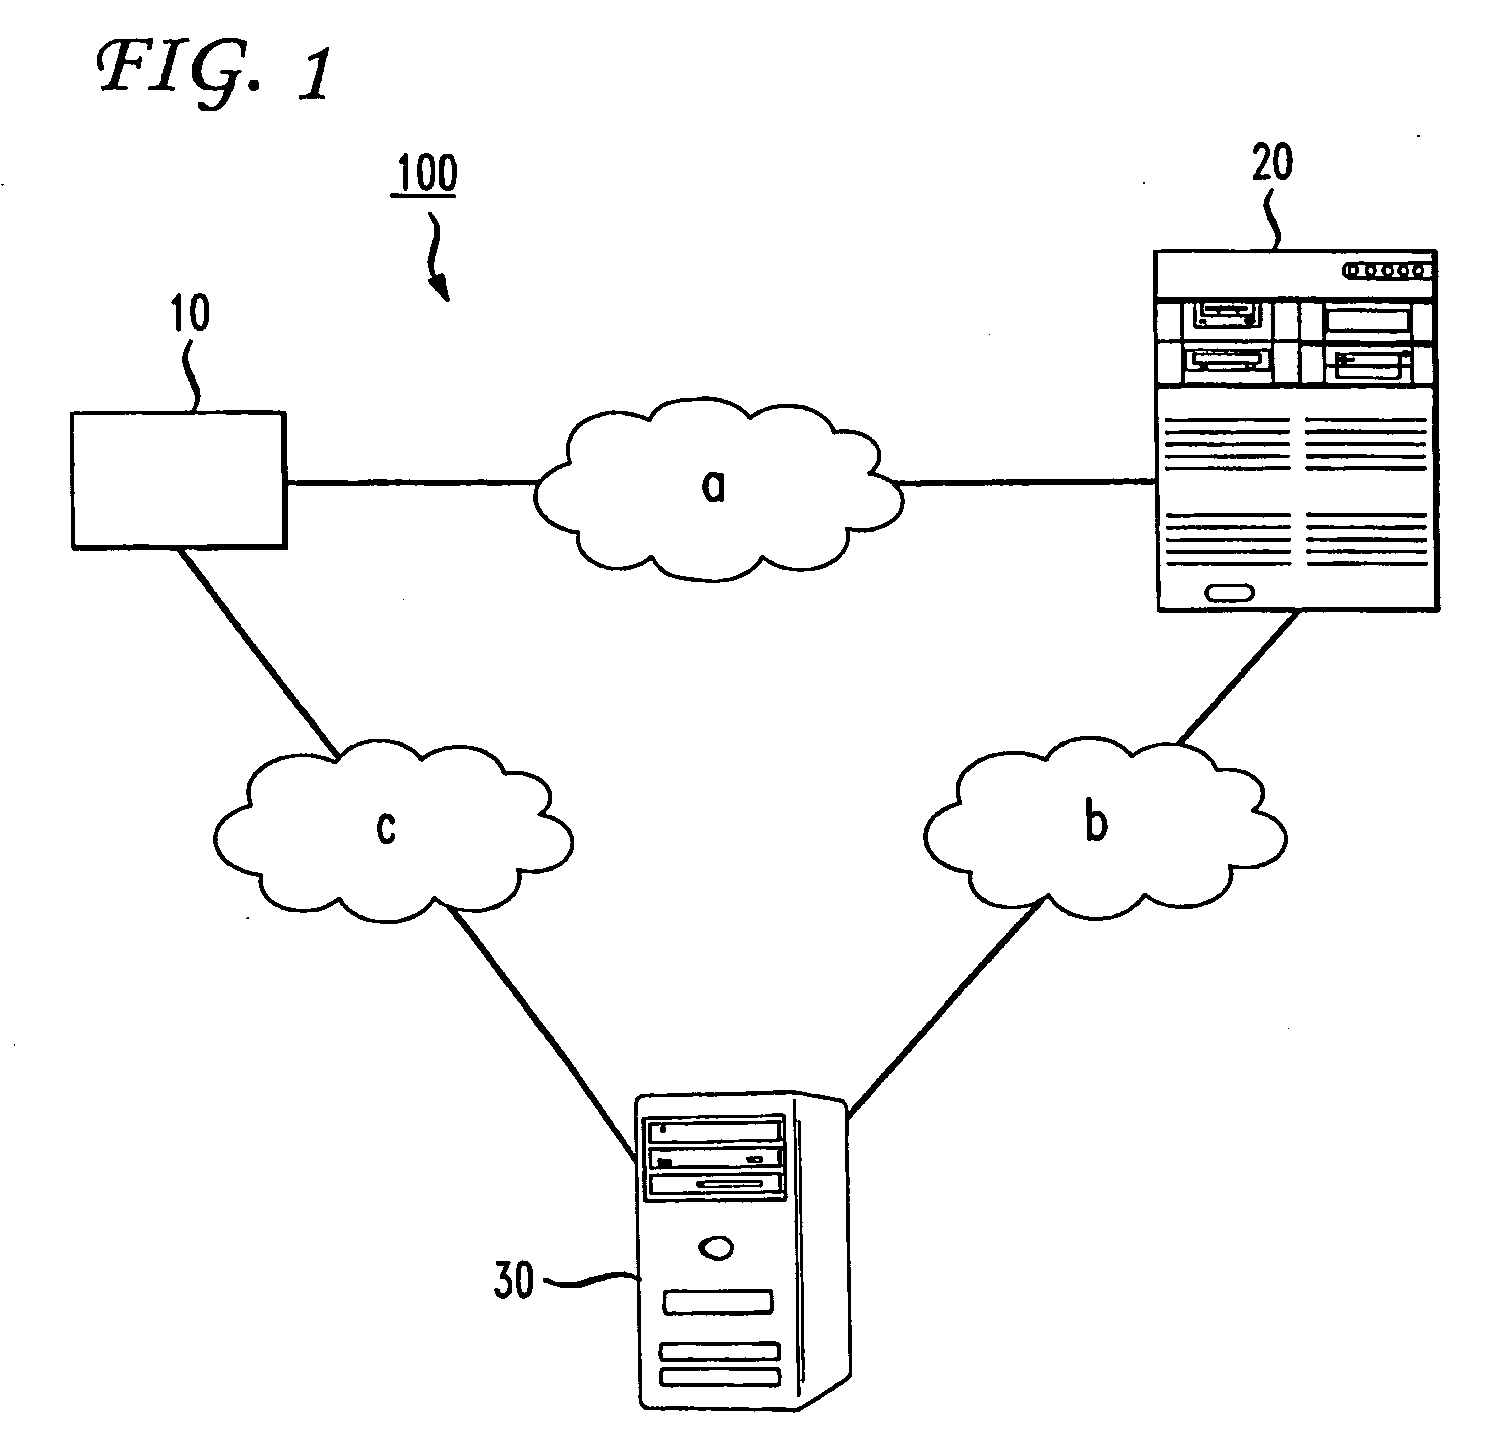 System and Method for Scheduling Downloading in a Cached Network Environment